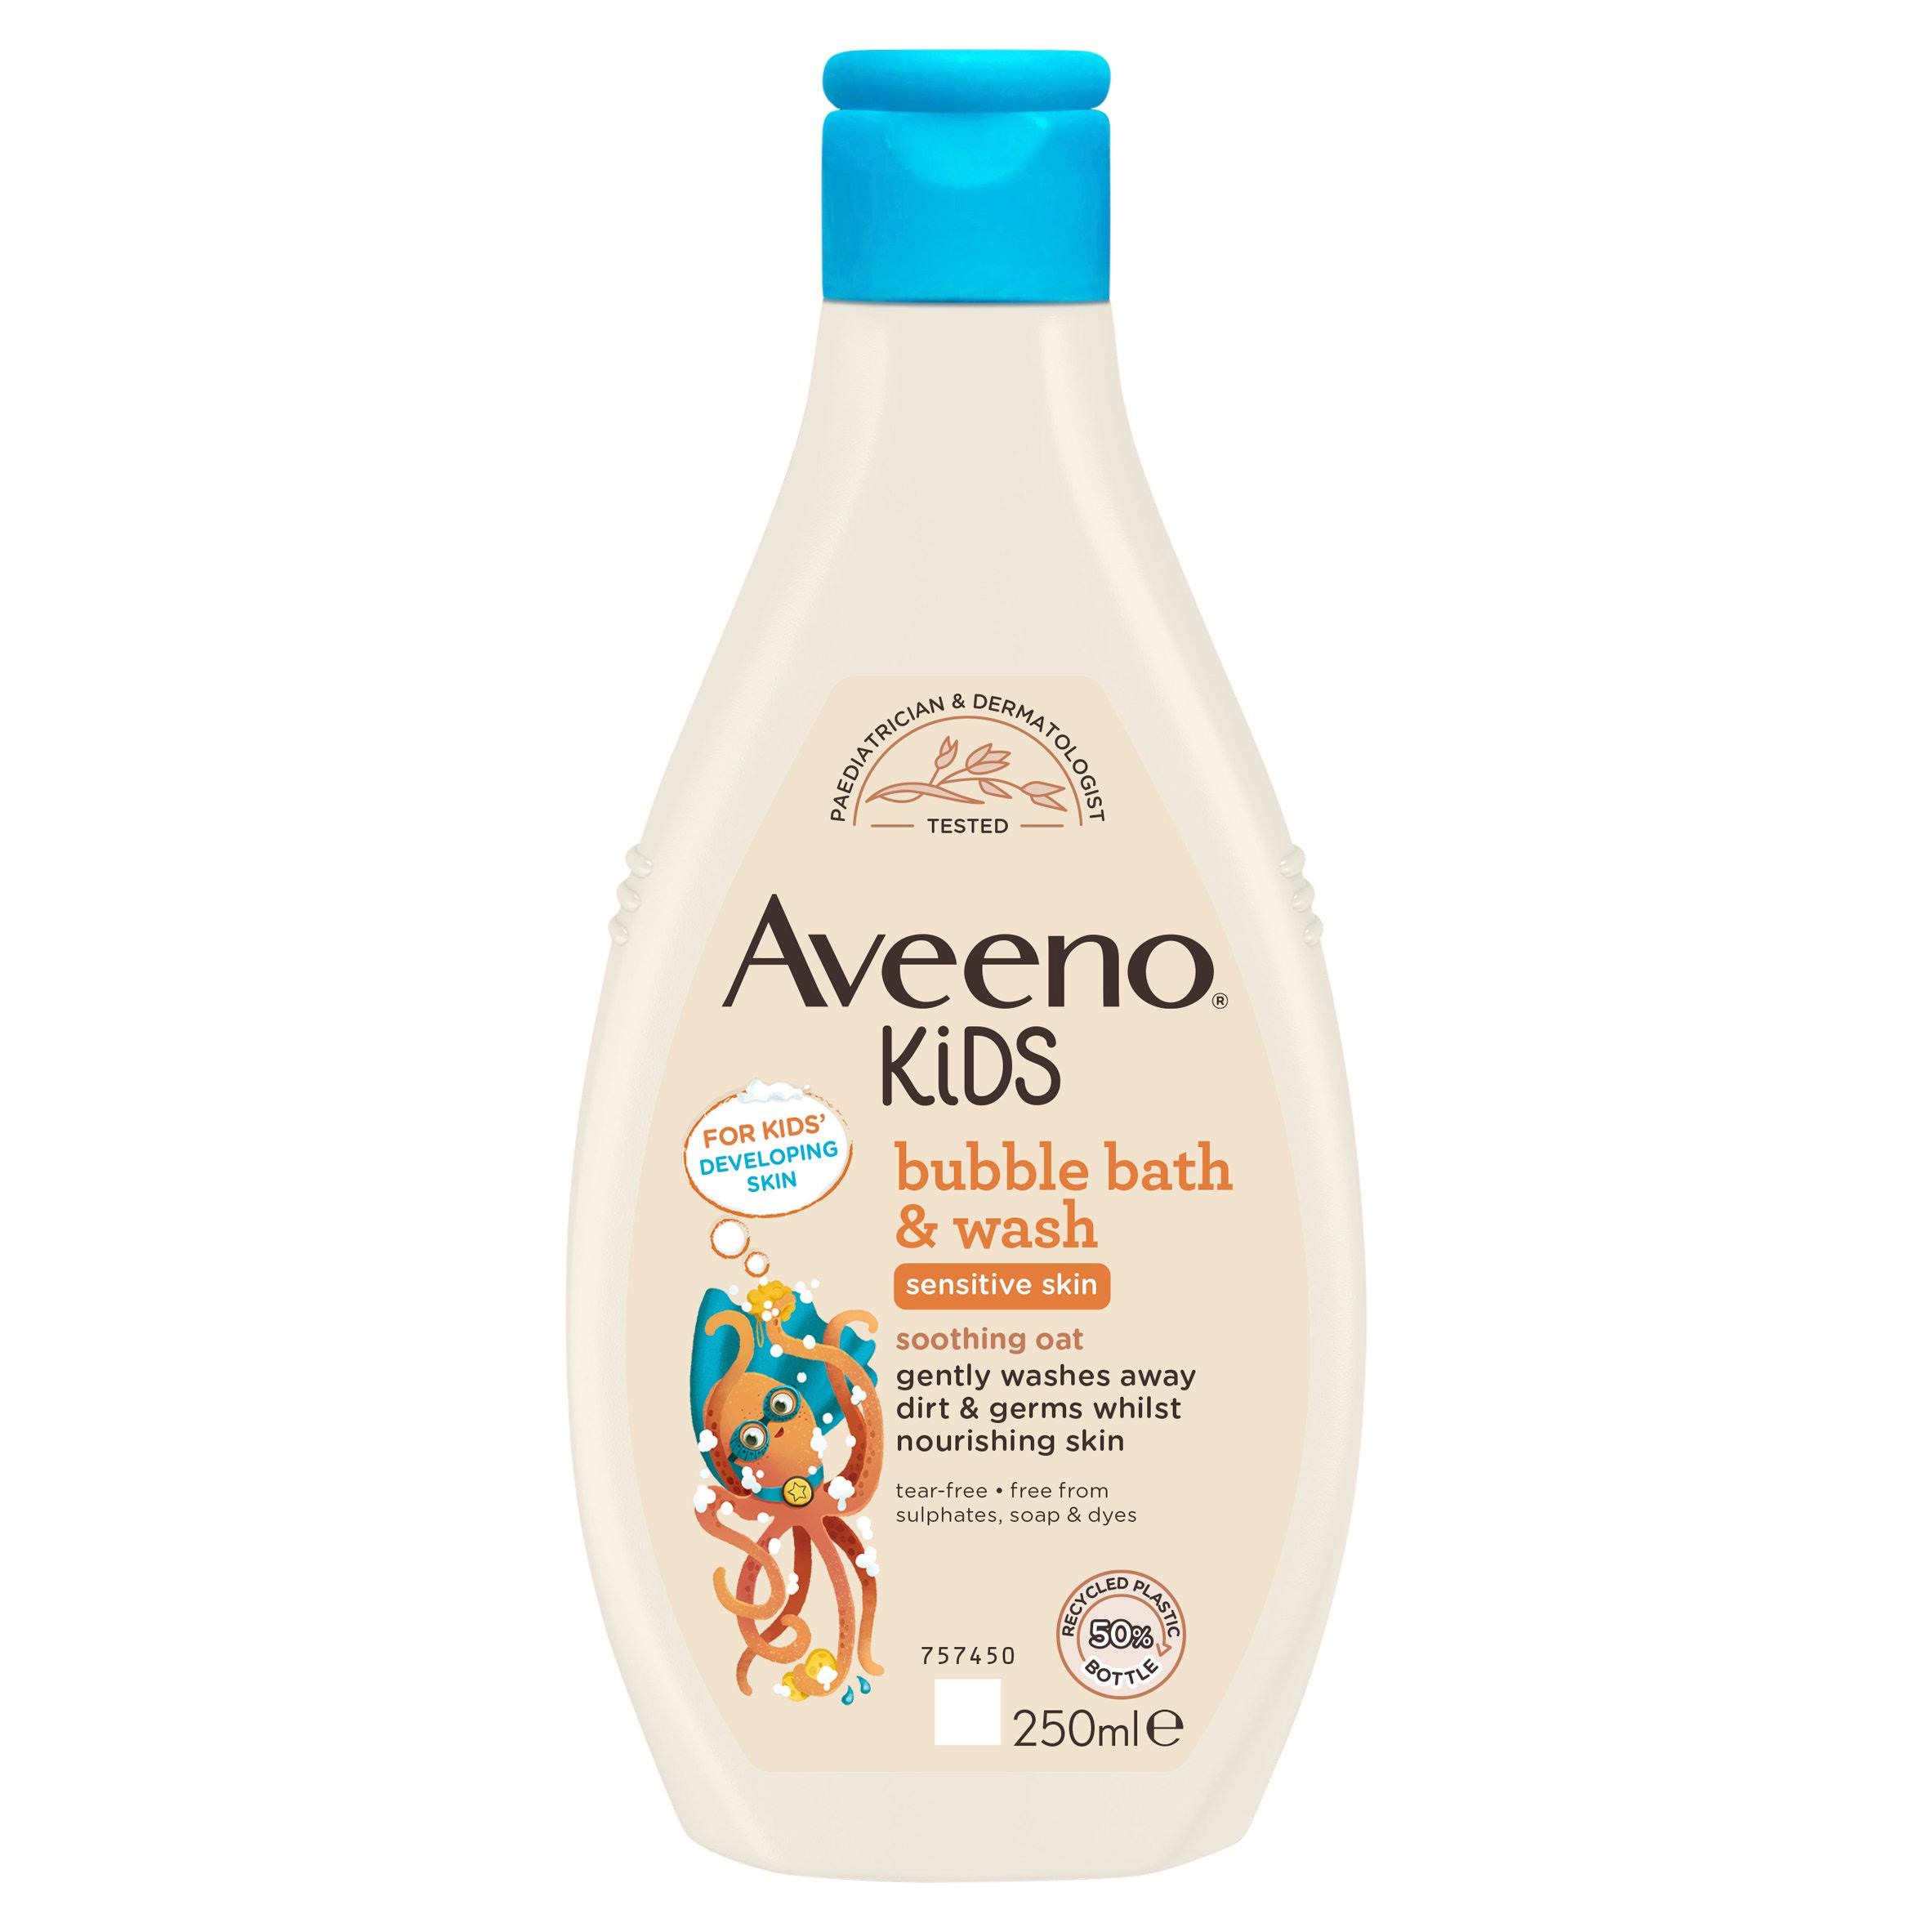 Aveeno Baby Kids Bubble Bath & Wash 250ml | Enriched with Soothing Oat Extract | Foam Body Wash Developed for Your Little Superhero | Childrens